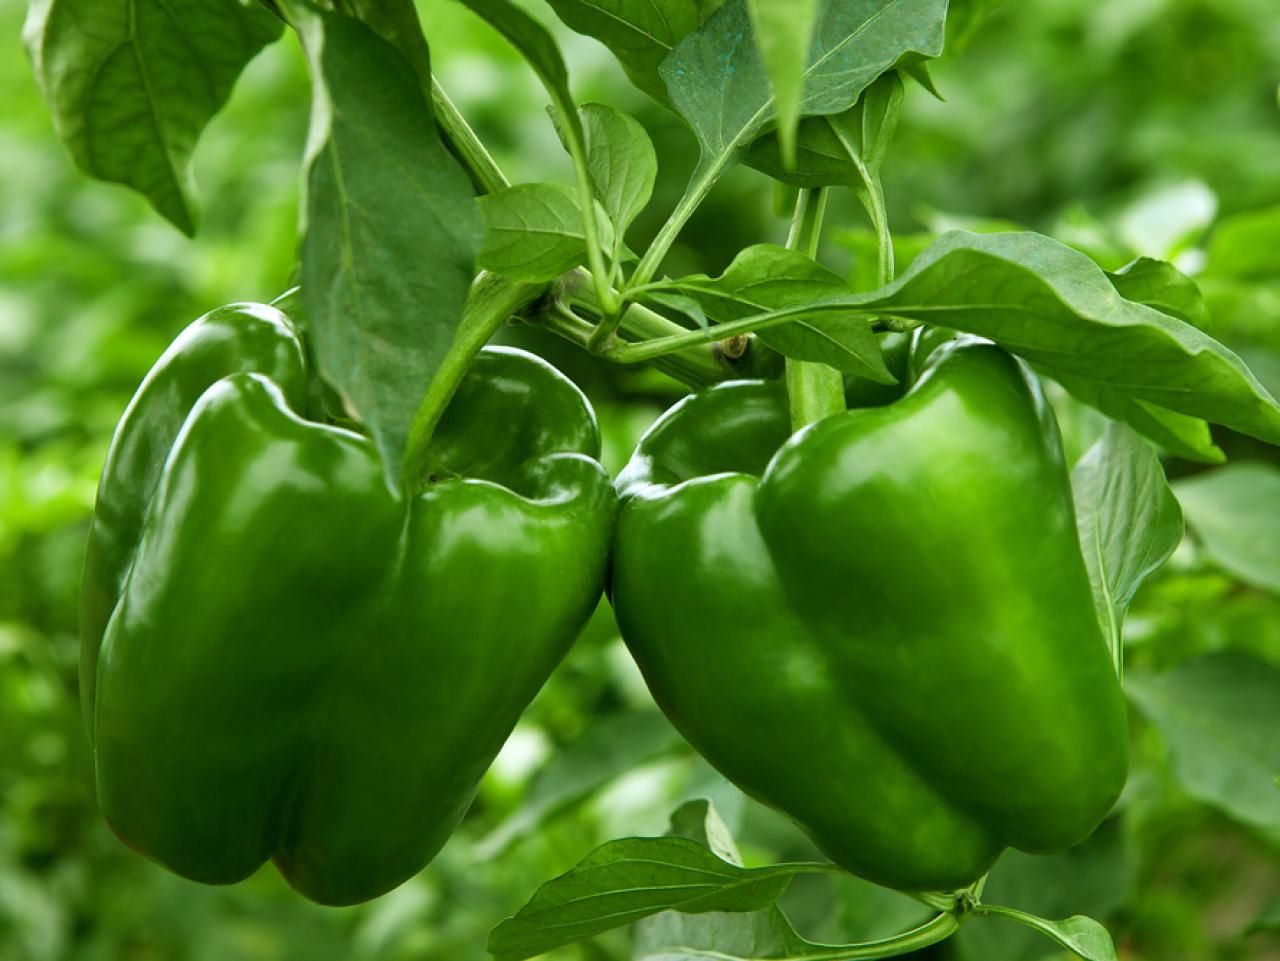 How To Store Green Peppers From The Garden